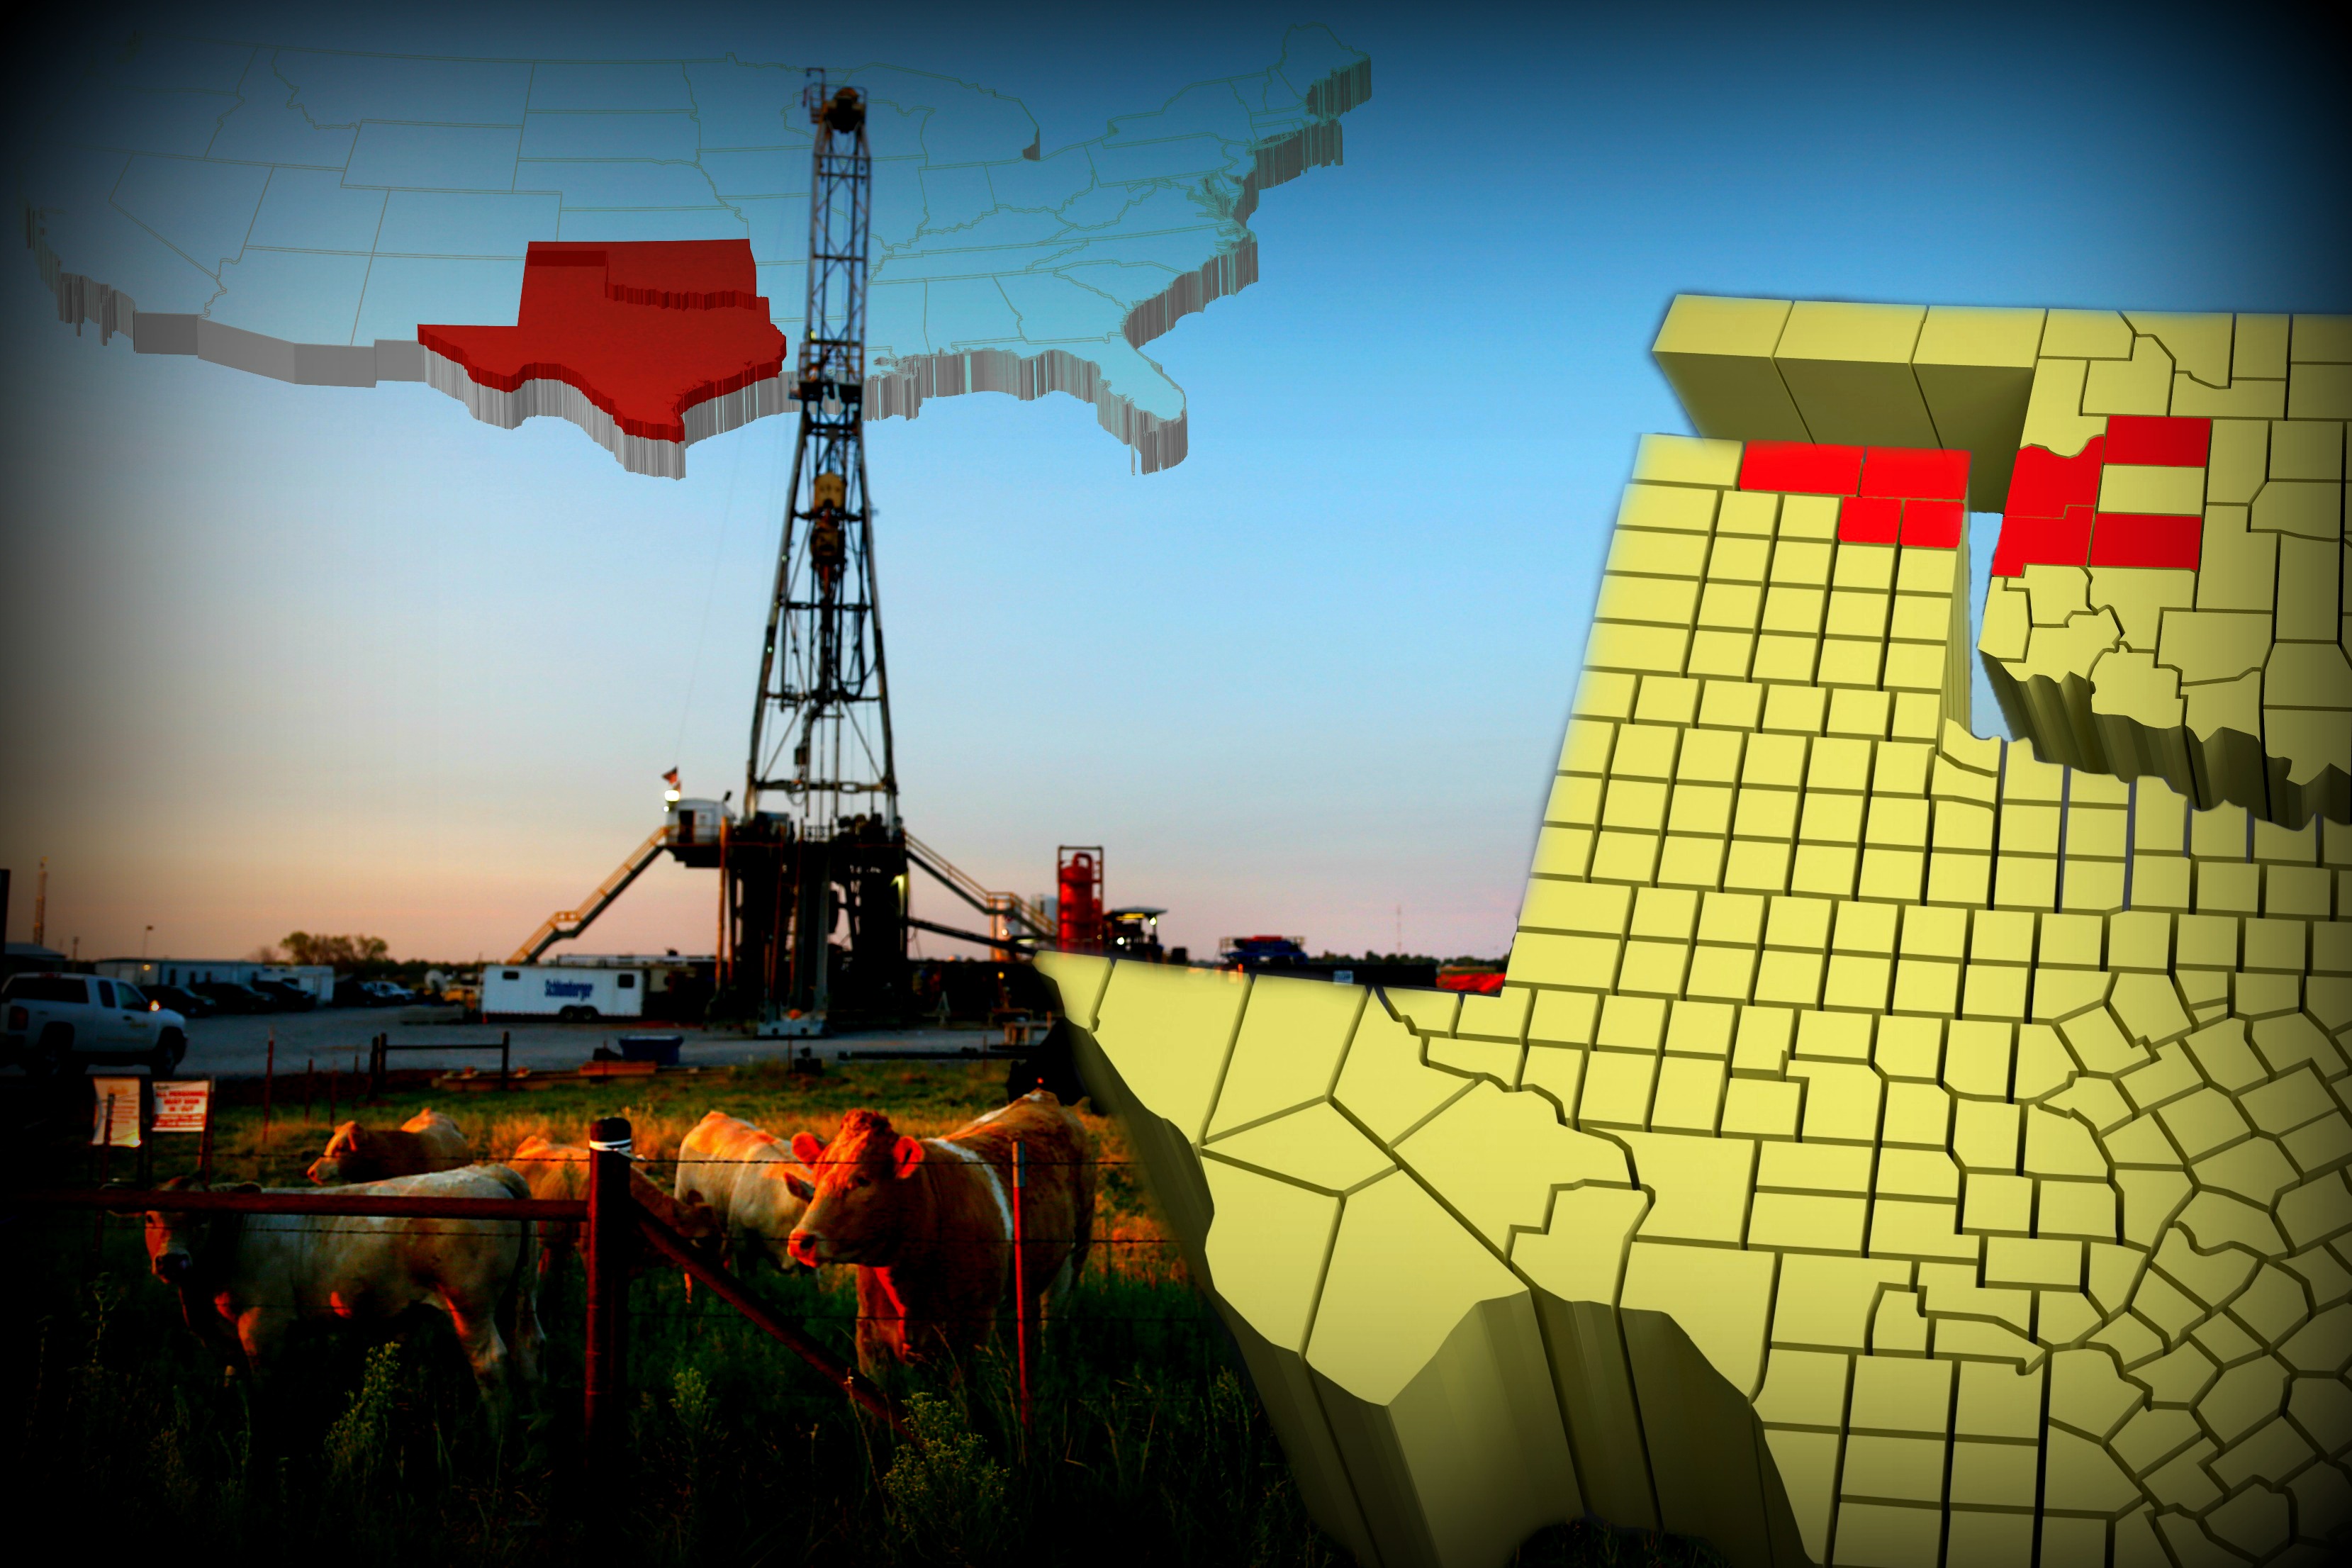 BP Plc, BP America Producing Co, The Oil Gas Asset Clearinghouse, Anadarko Basin, sale, marketed, on the market, oil, natural gas, Oklahoma, Texas Panhandle, Beckham County, Dewey County, Roger Mills County, Washit County, Hemphill County, Lipscomb County